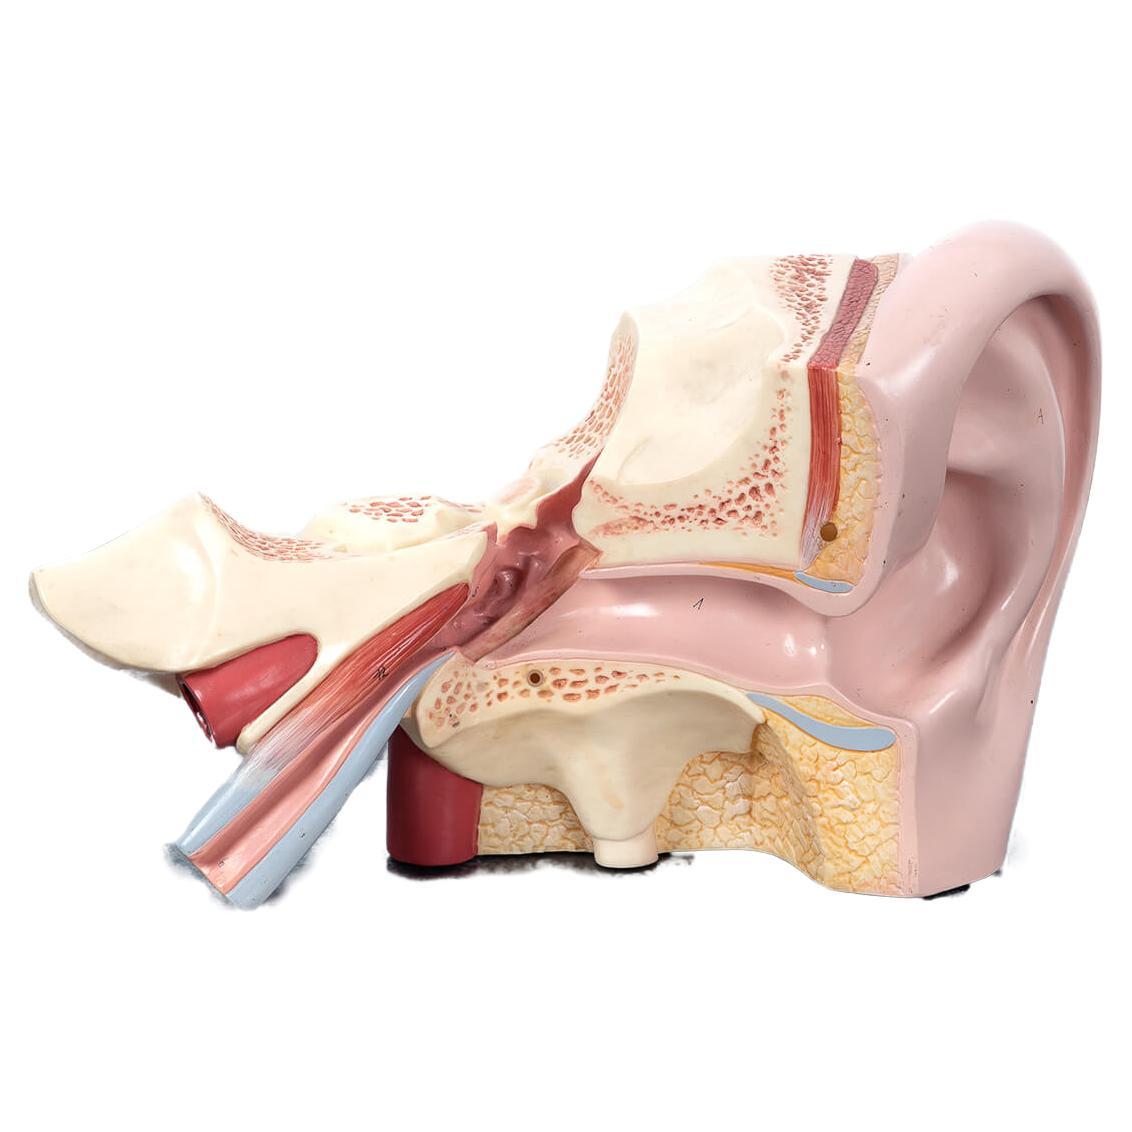 Anatomical Model of the Human Ear For Sale